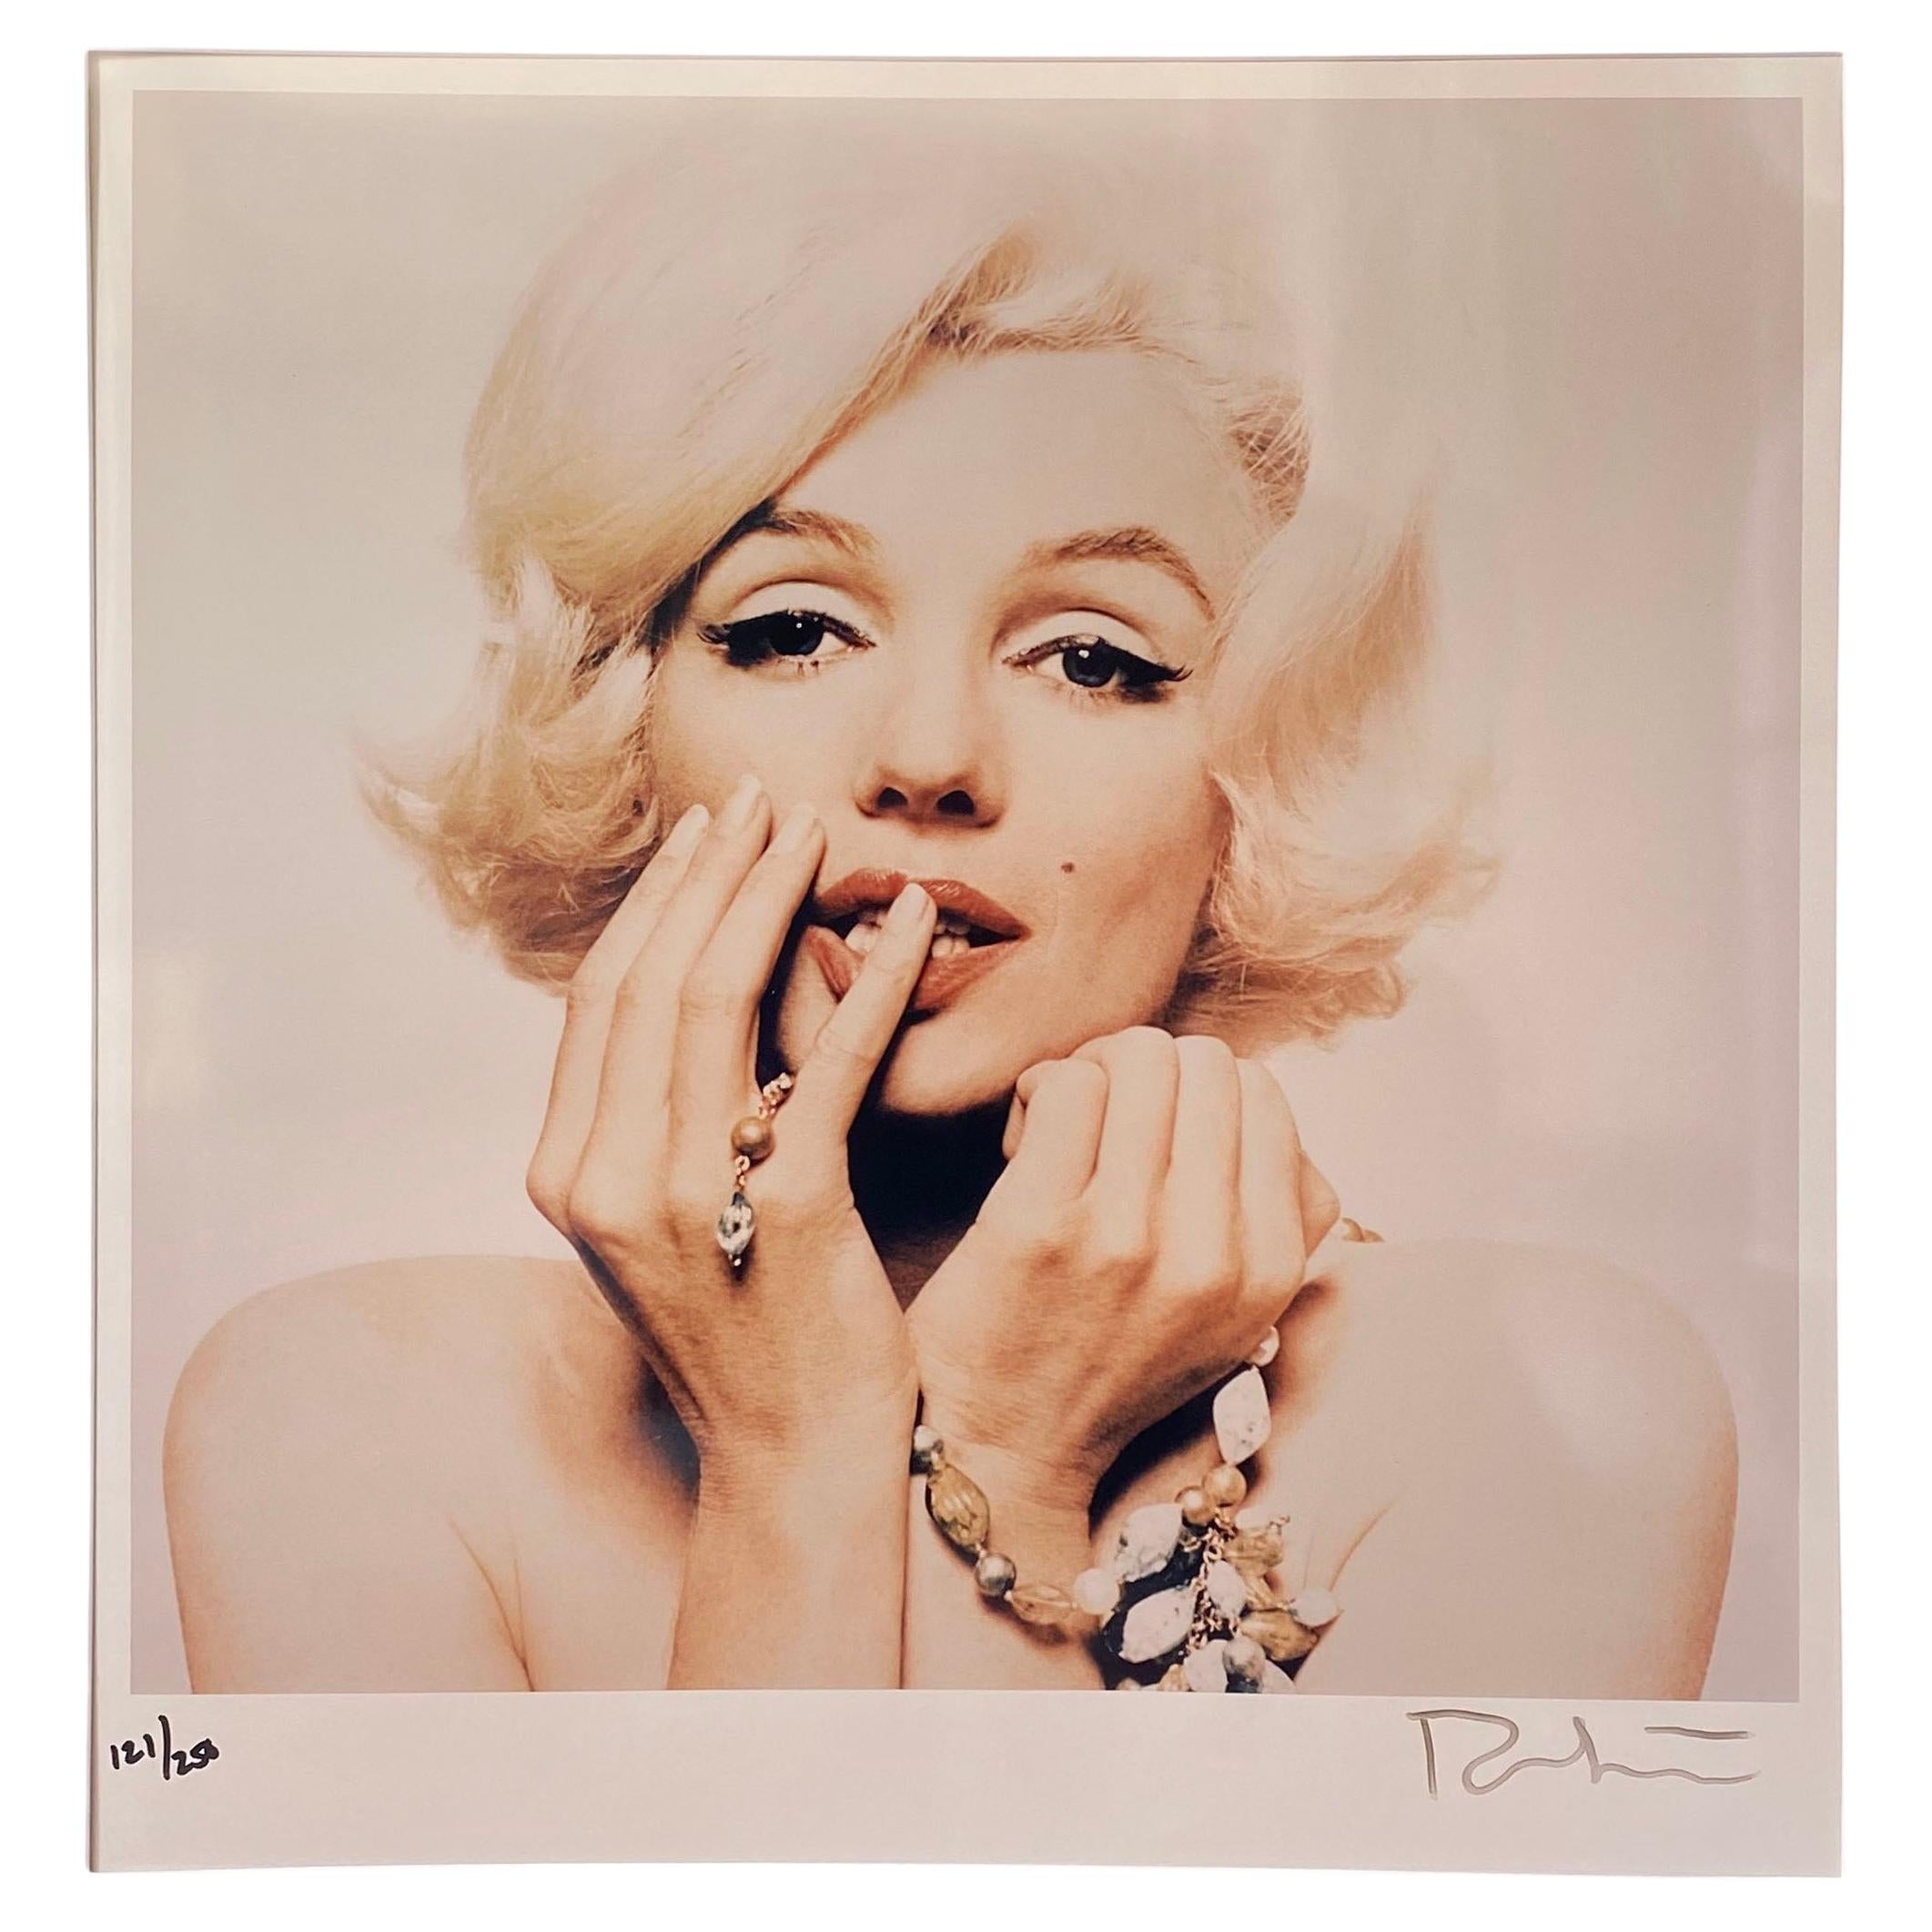 Photograph of Marilyn by Bert Stern 1980 Silver Print